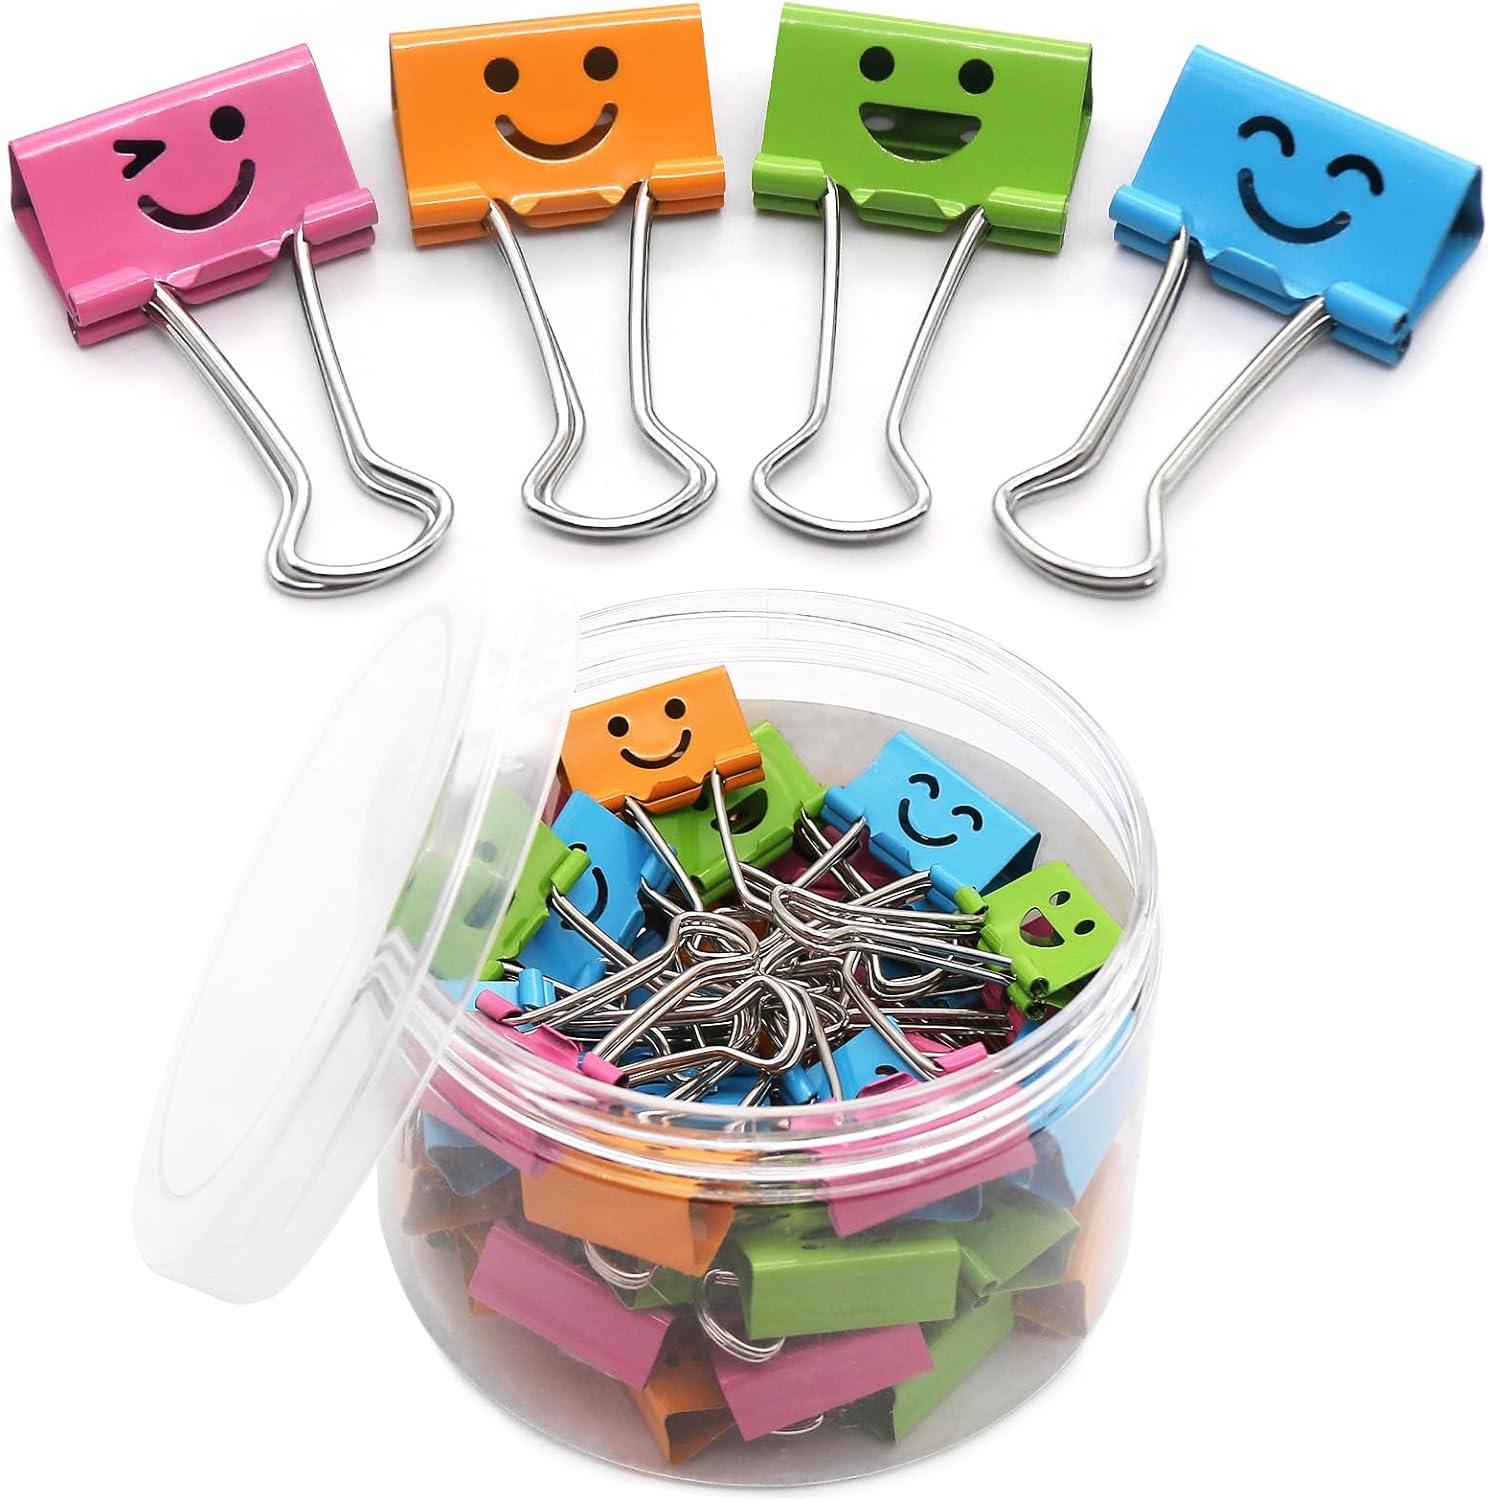 coideal 40 pack colored paper clips with cute lovely smiling face file organizer paper holder metal binder